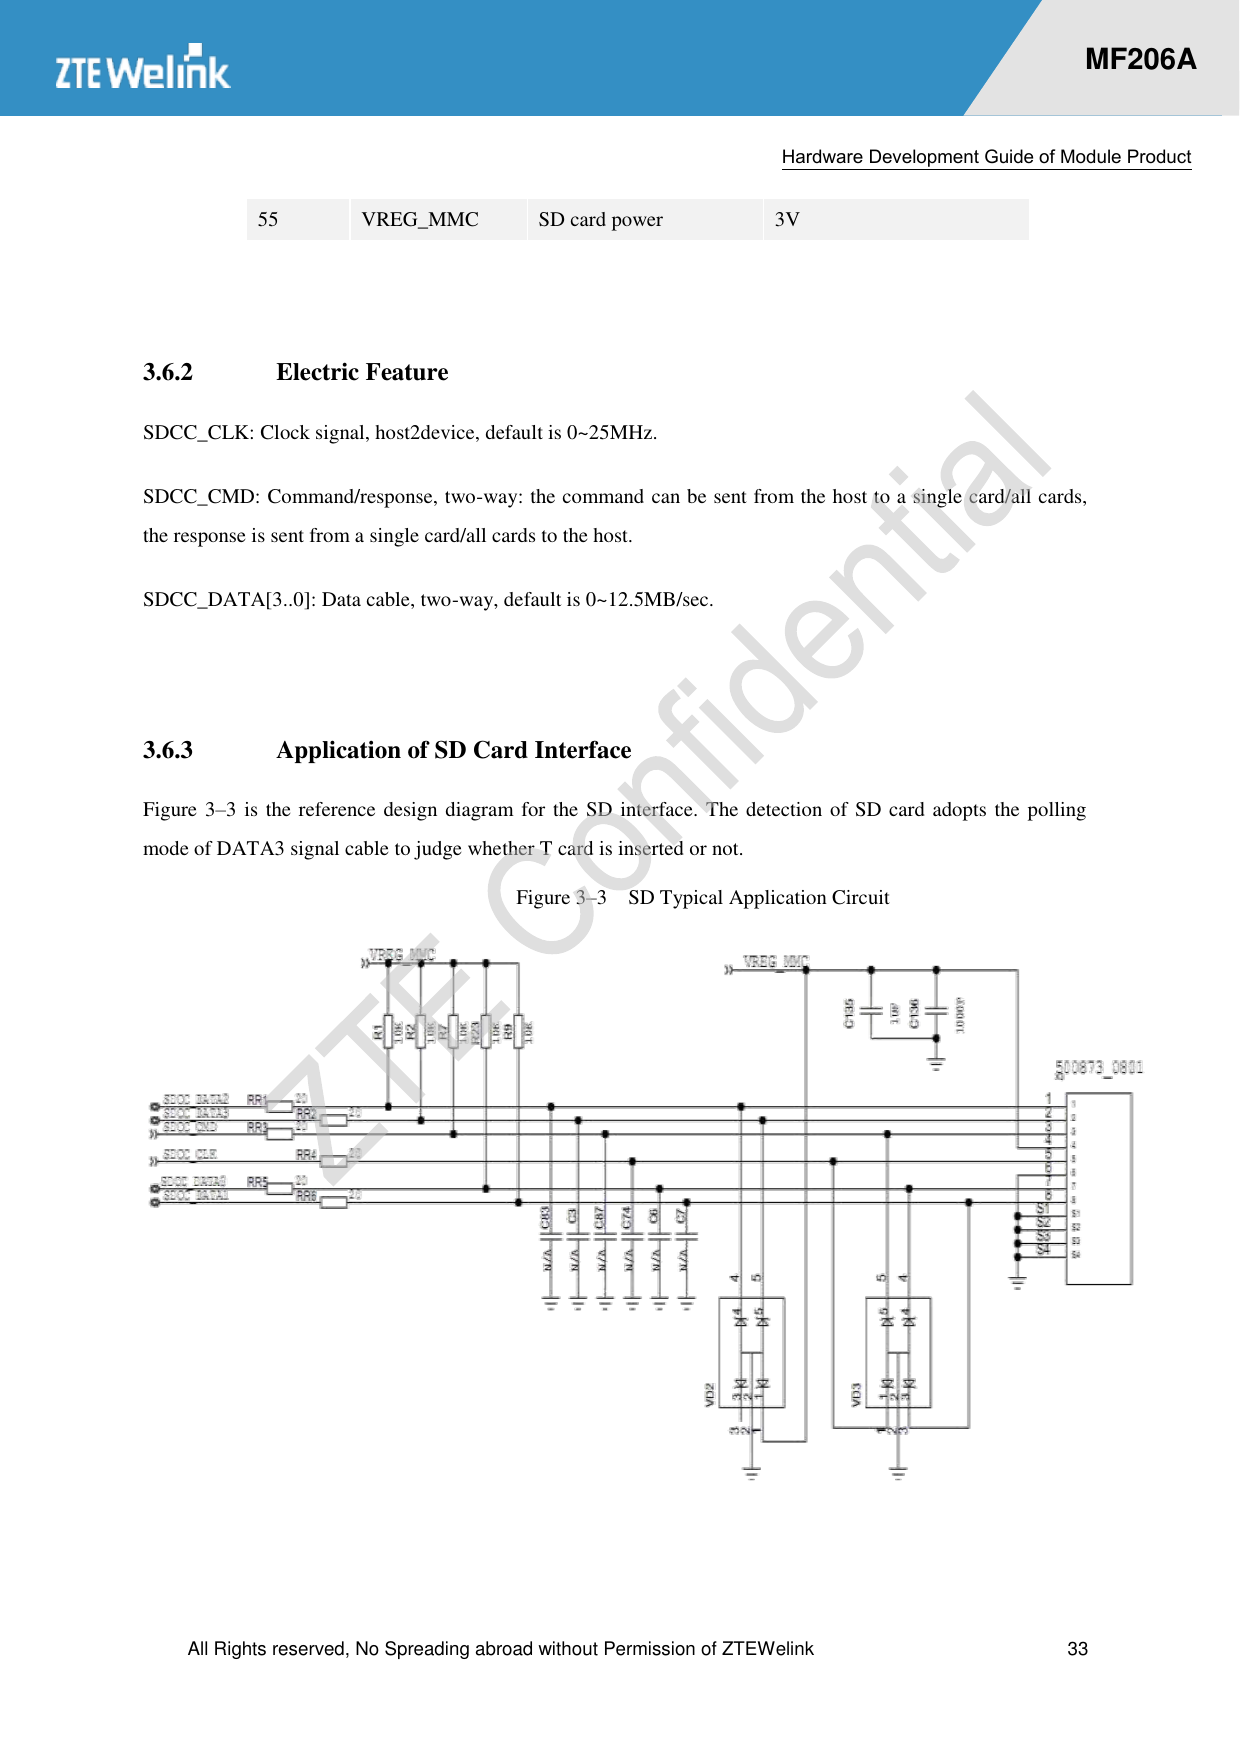  Hardware Development Guide of Module Product  All Rights reserved, No Spreading abroad without Permission of ZTEWelink  33    MF206A 55 VREG_MMC SD card power 3V  3.6.2 Electric Feature SDCC_CLK: Clock signal, host2device, default is 0~25MHz.   SDCC_CMD: Command/response, two-way: the command can be sent from the host to a single card/all cards, the response is sent from a single card/all cards to the host.   SDCC_DATA[3..0]: Data cable, two-way, default is 0~12.5MB/sec.    3.6.3 Application of SD Card Interface Figure 3–3 is the reference design diagram for the SD interface. The detection of SD card adopts the polling mode of DATA3 signal cable to judge whether T card is inserted or not.   Figure 3–3  SD Typical Application Circuit  